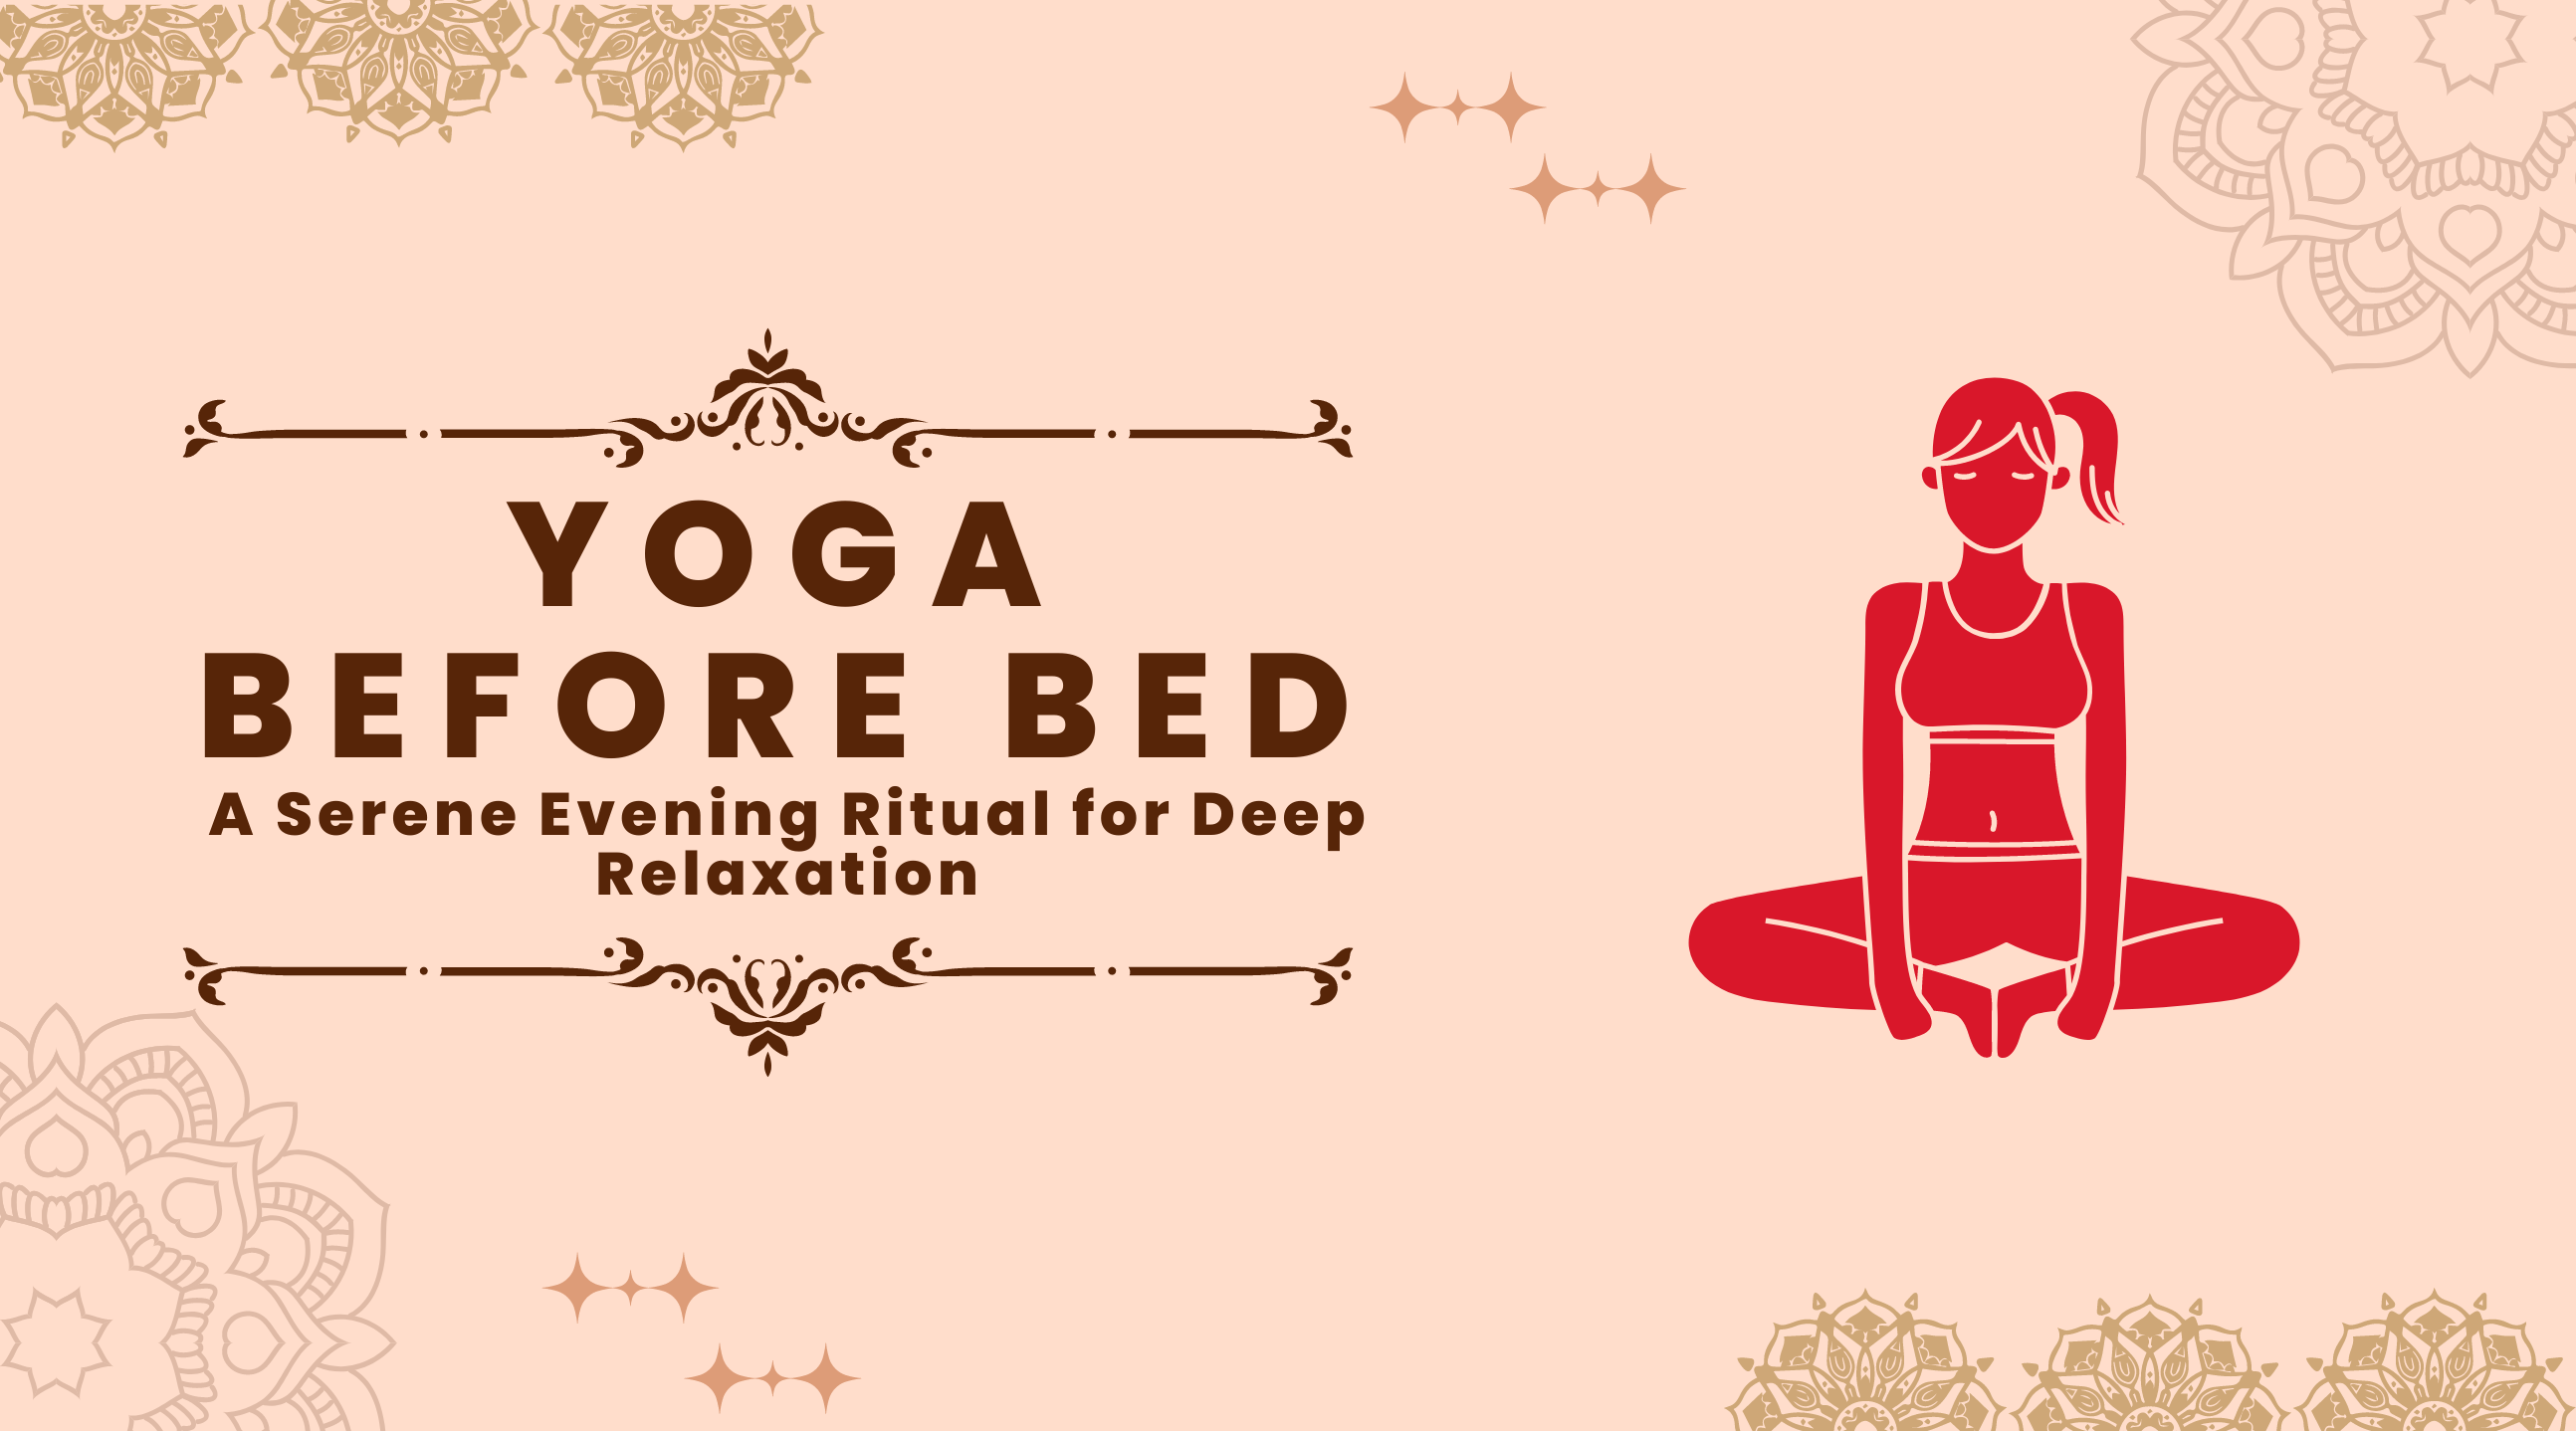 10 Bedtime Yoga Poses For A Better Night's Sleep | DIY Active